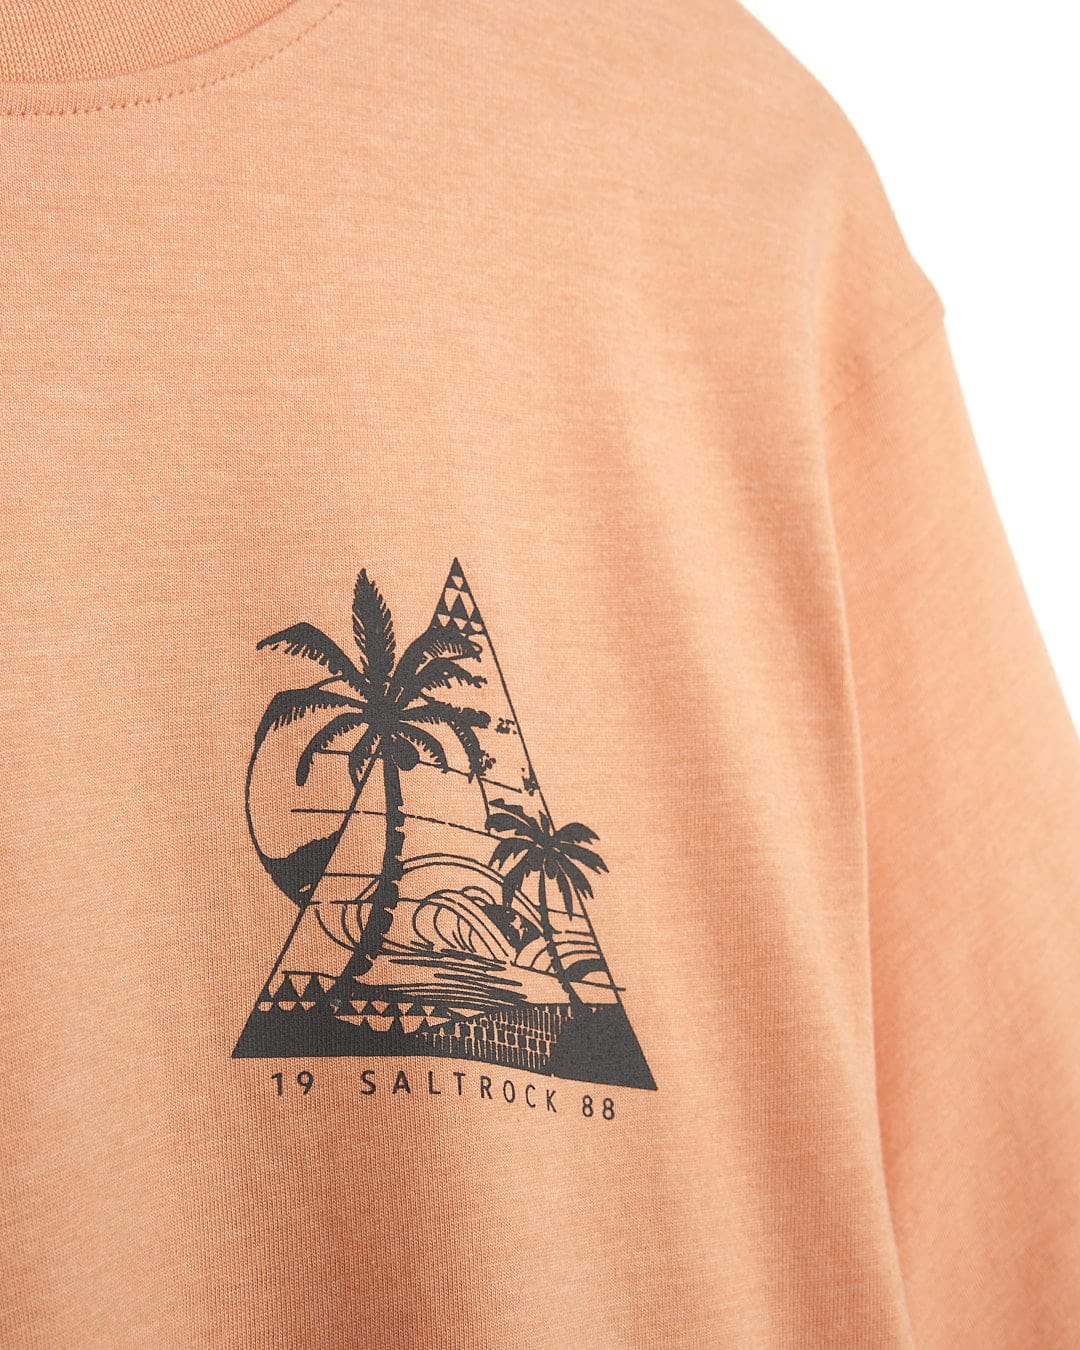 A Geo Beach - Mens Short Sleeve T-Shirt - Coral by Saltrock with a palm tree and a palm tree on it.